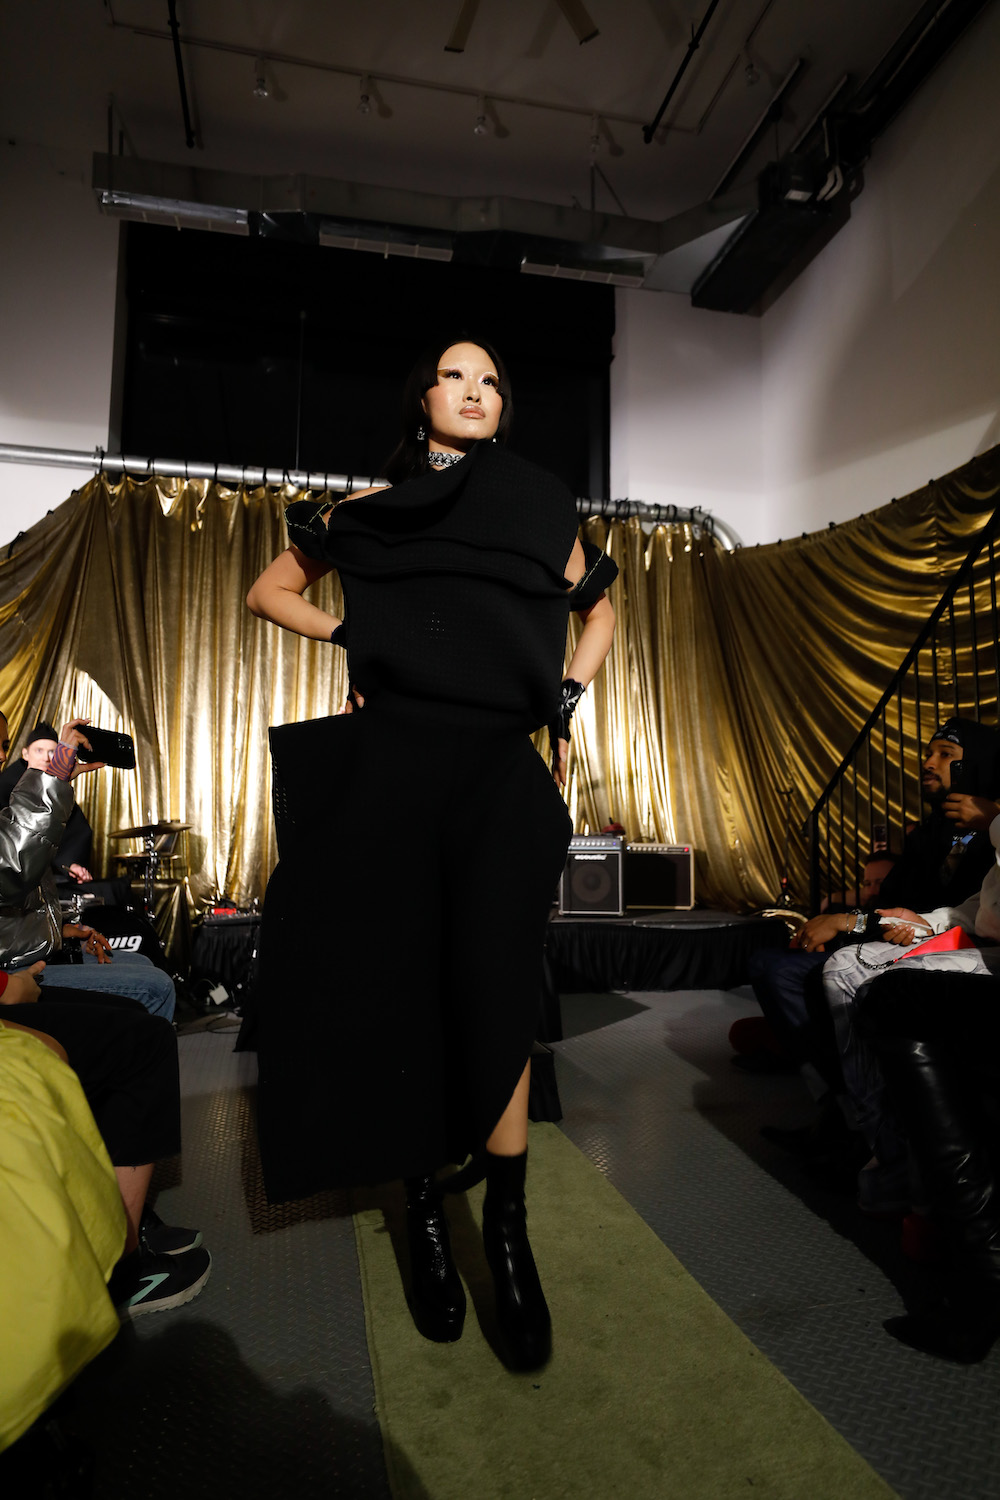 Model dressed in full black walking down the runway designed by collaborators Paradoxvestedrelics, Yxen, and Kids Destroy.